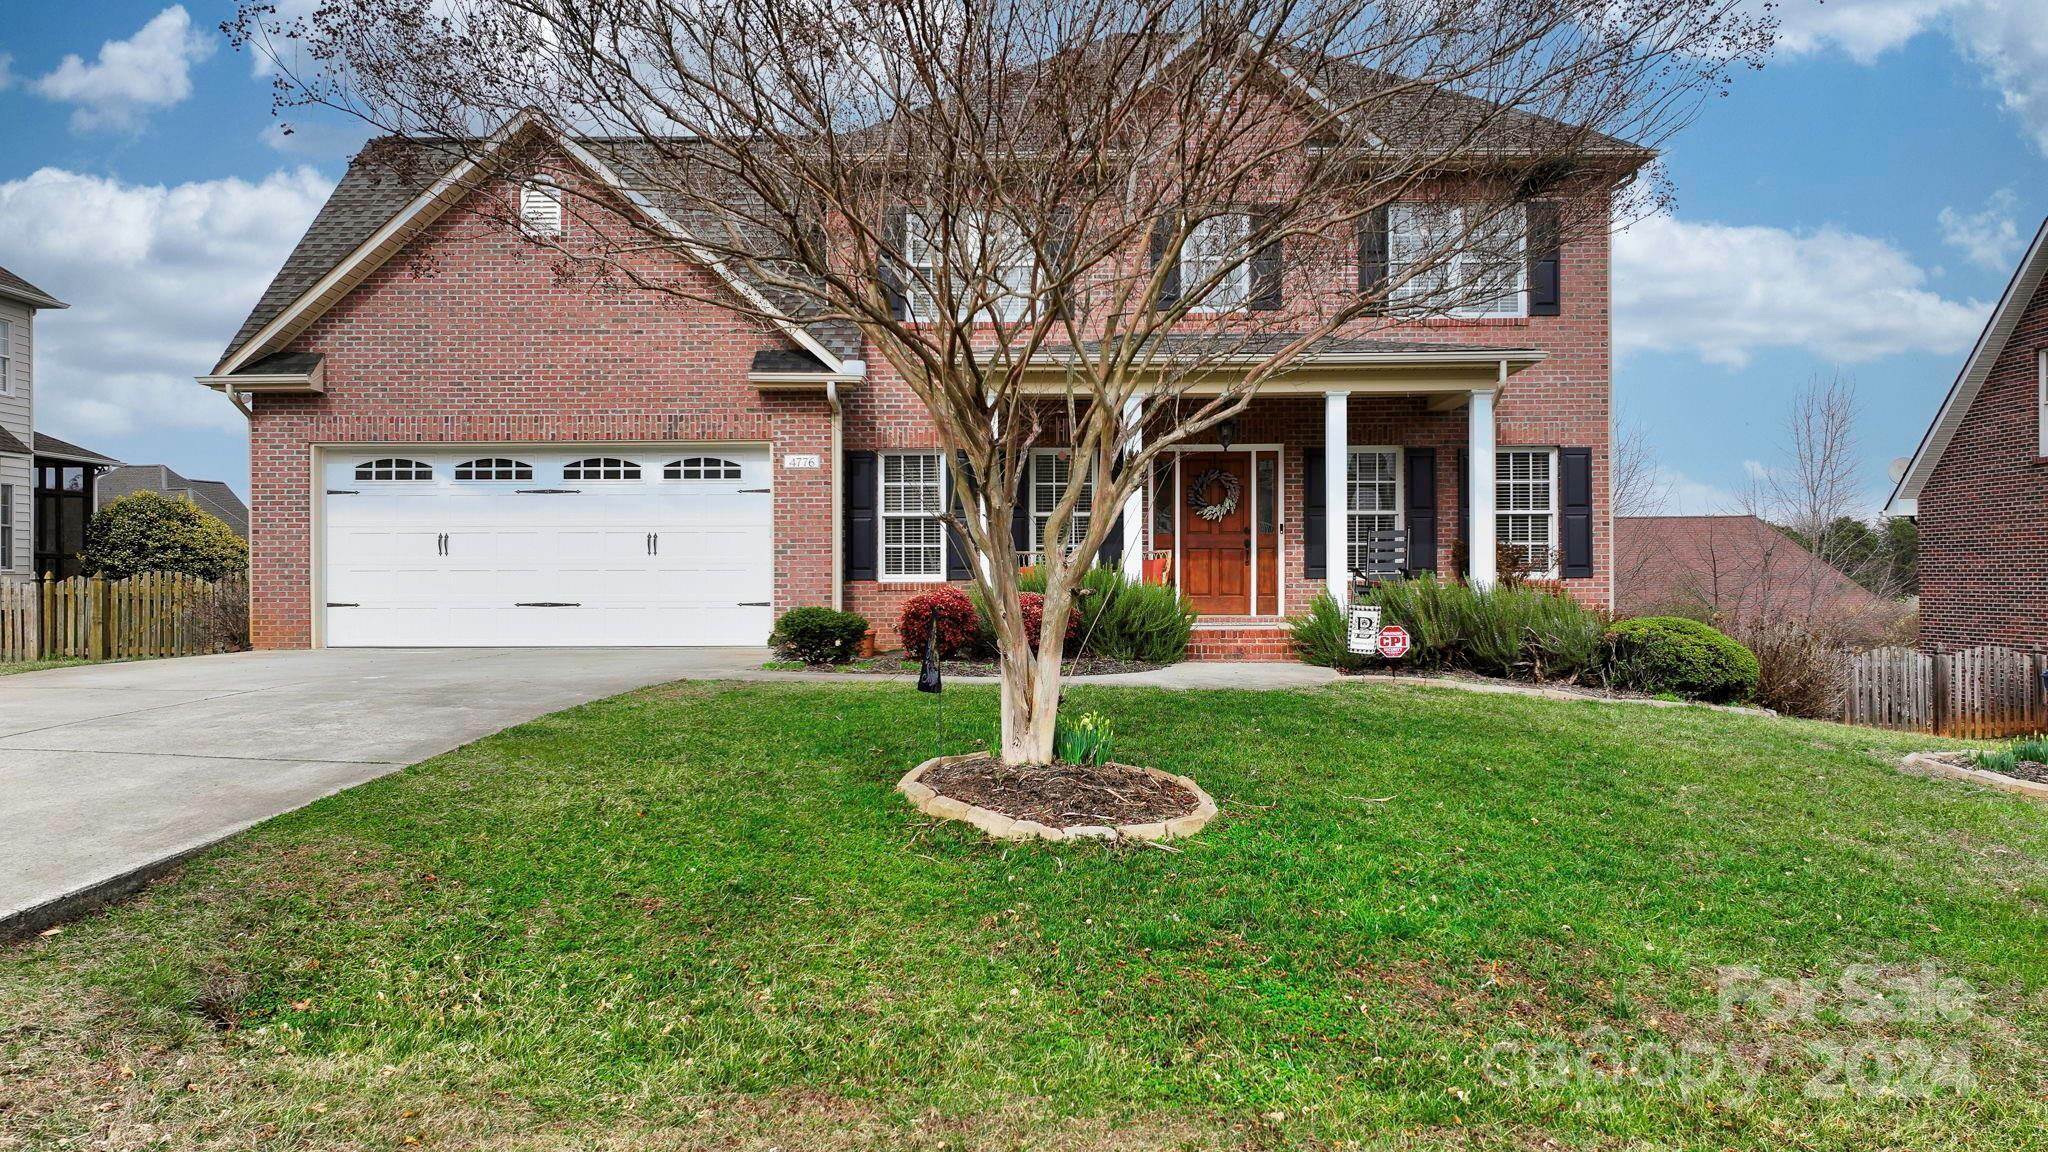 Photo one of 4776 Meadow Lark Ln Hickory NC 28602 | MLS 4109034